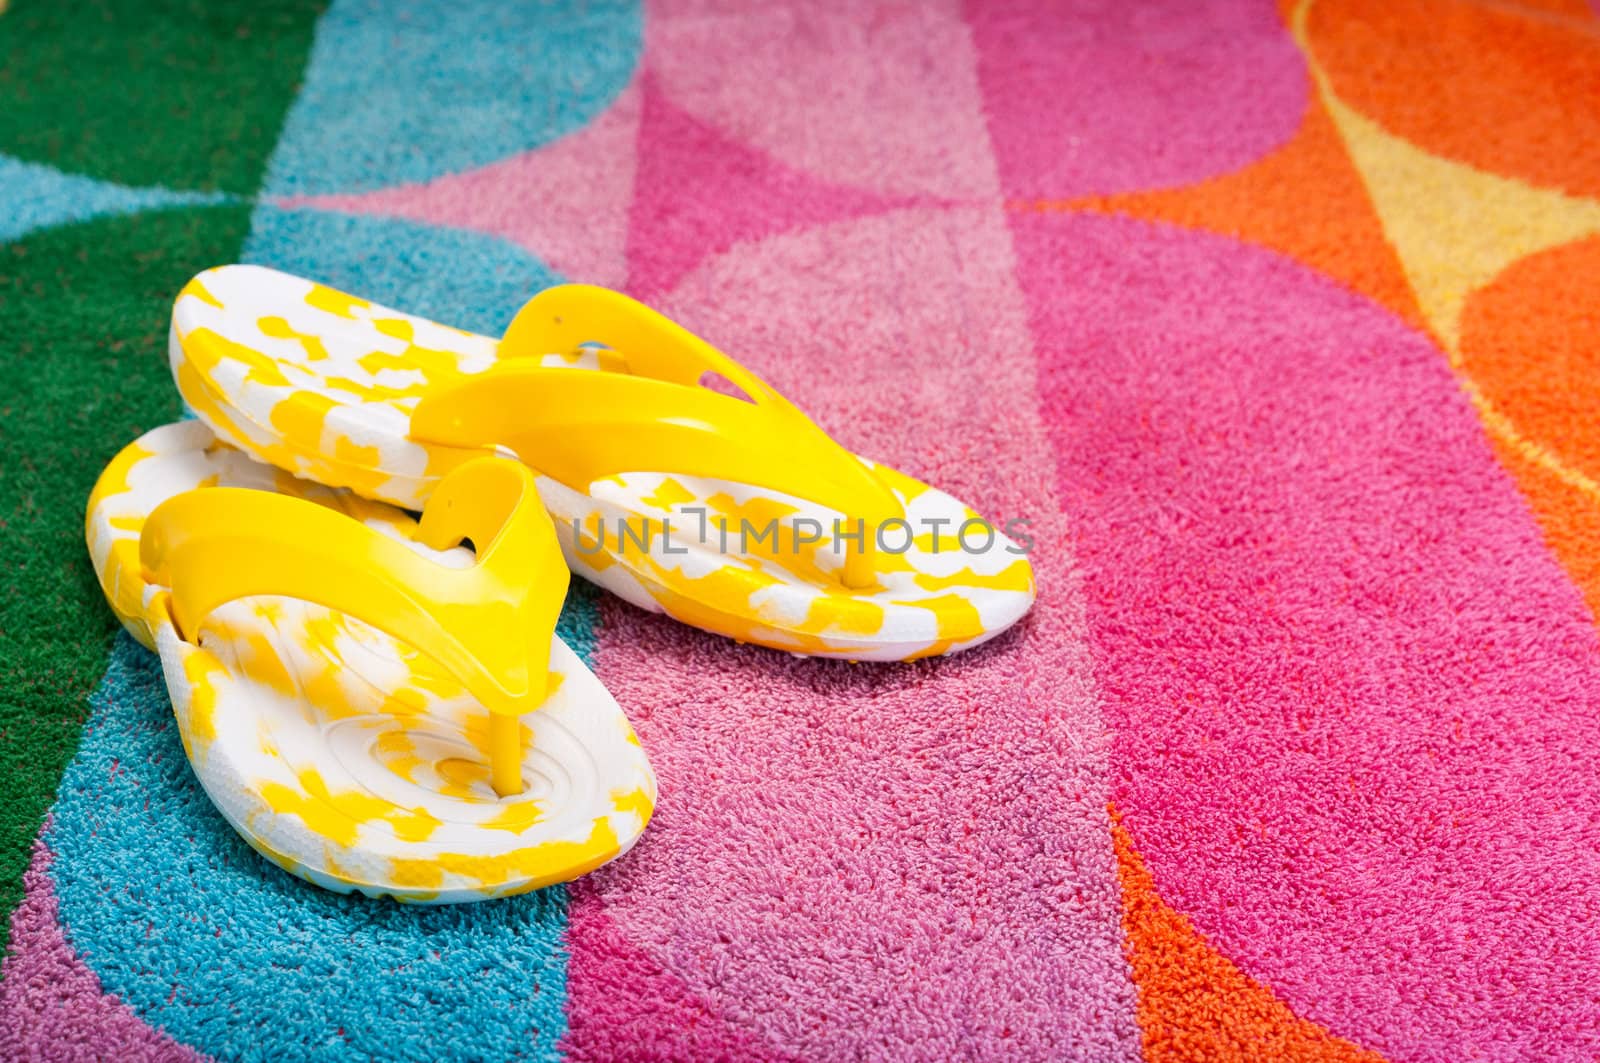 Bright yellow flip-flops on a colorful beach towel